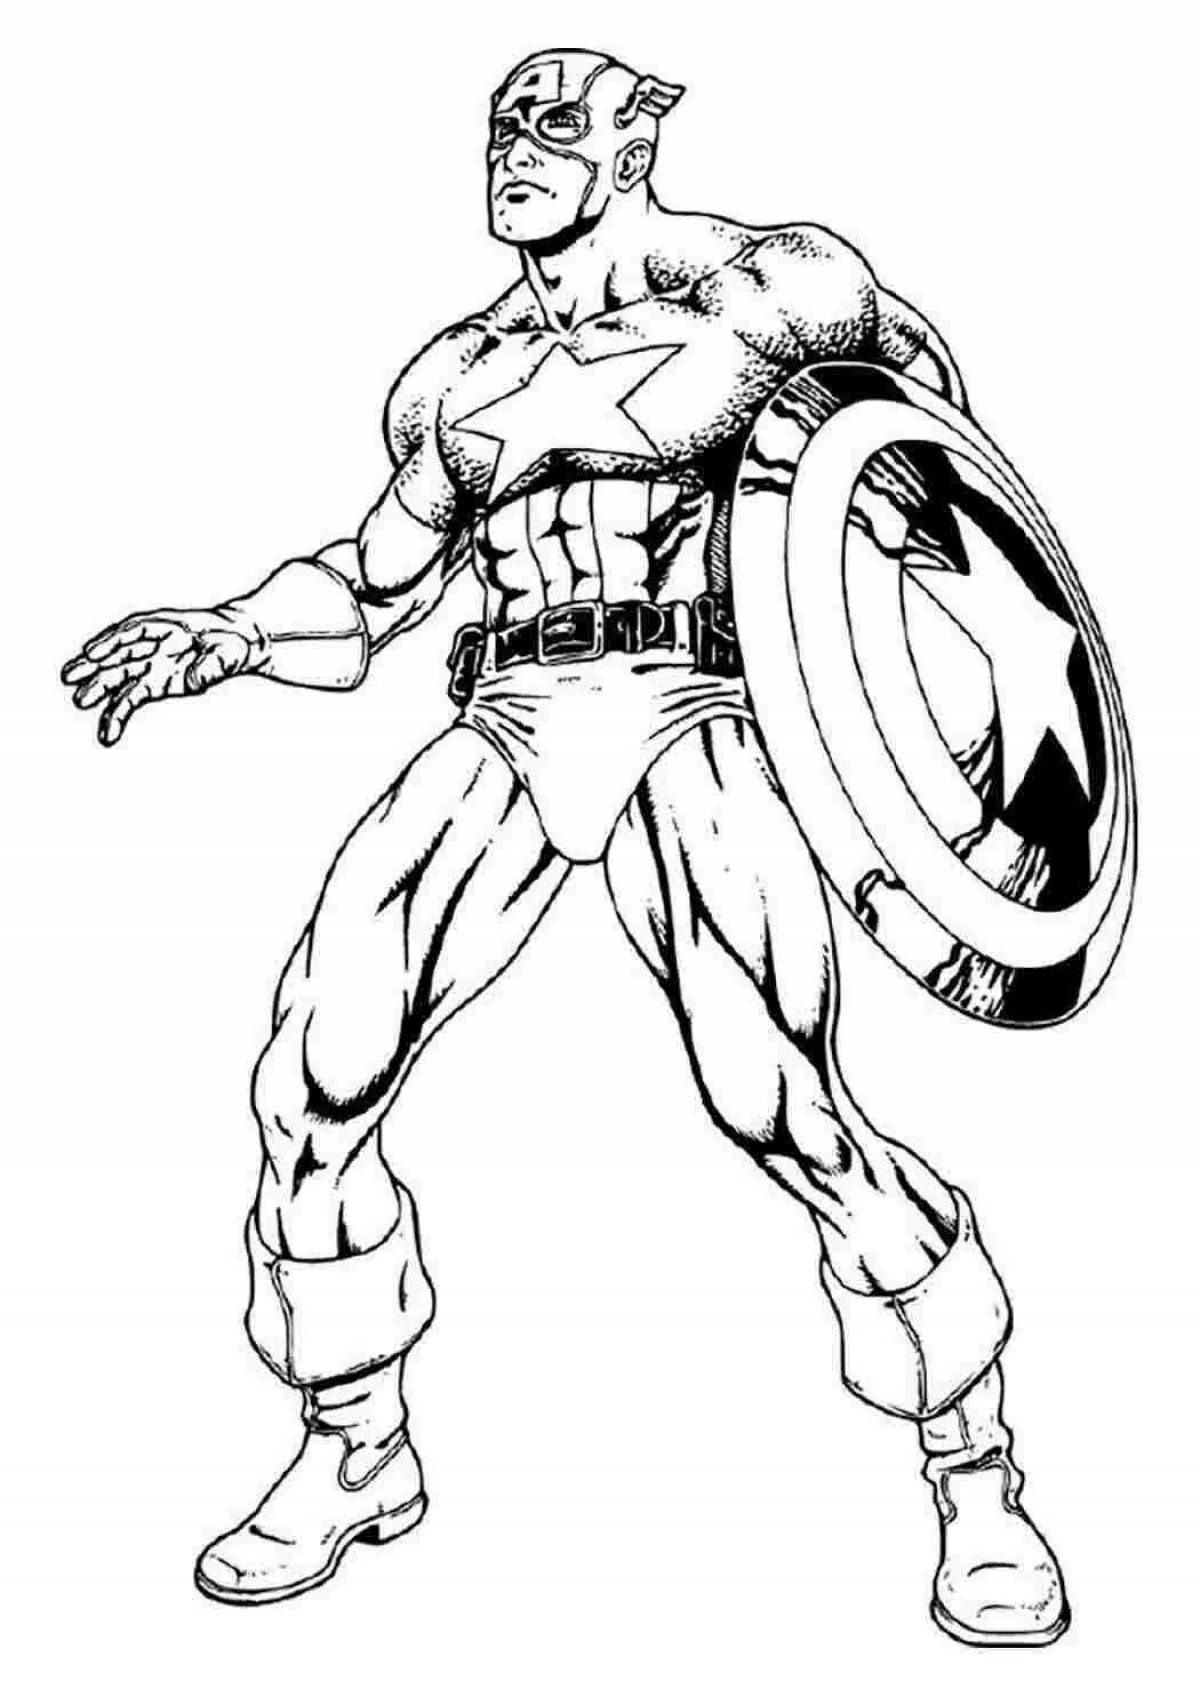 Brave captain america coloring pages for boys